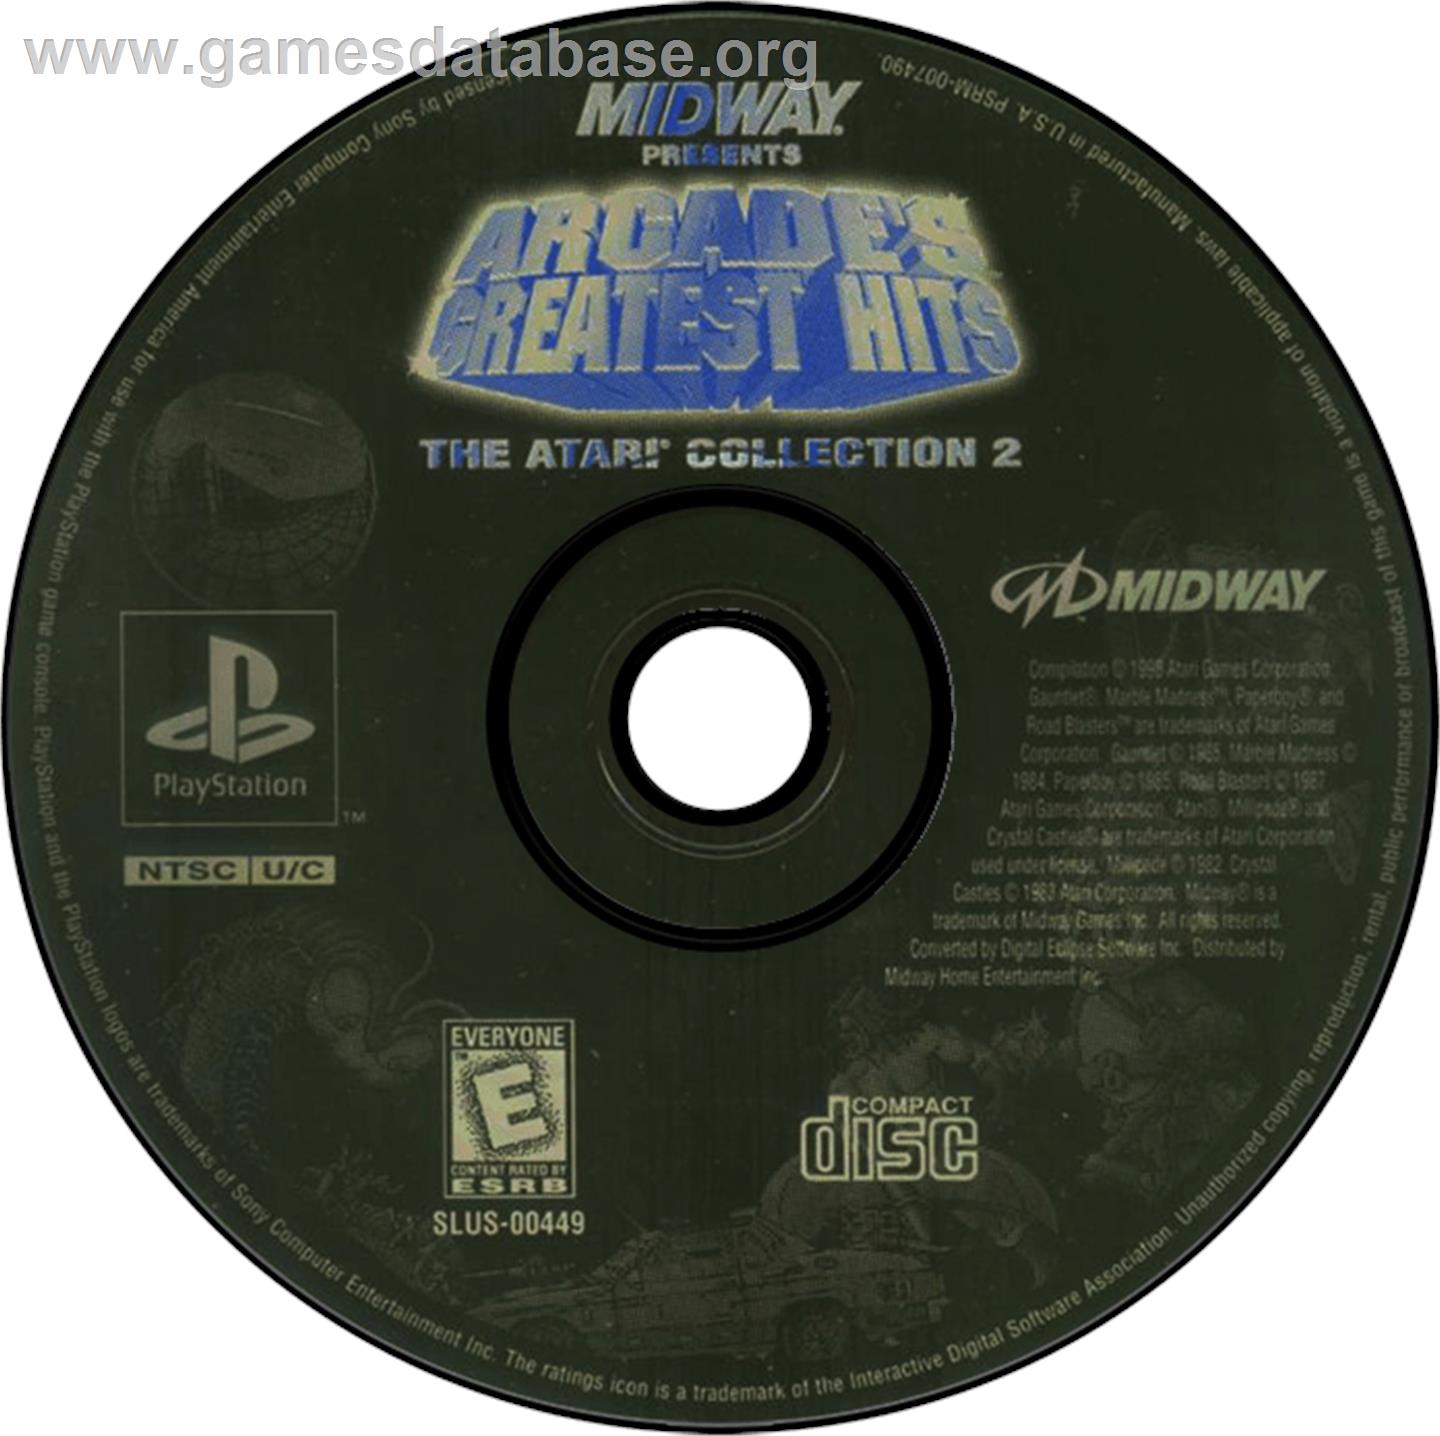 Arcade's Greatest Hits: The Atari Collection 2 - Sony Playstation - Artwork - Disc